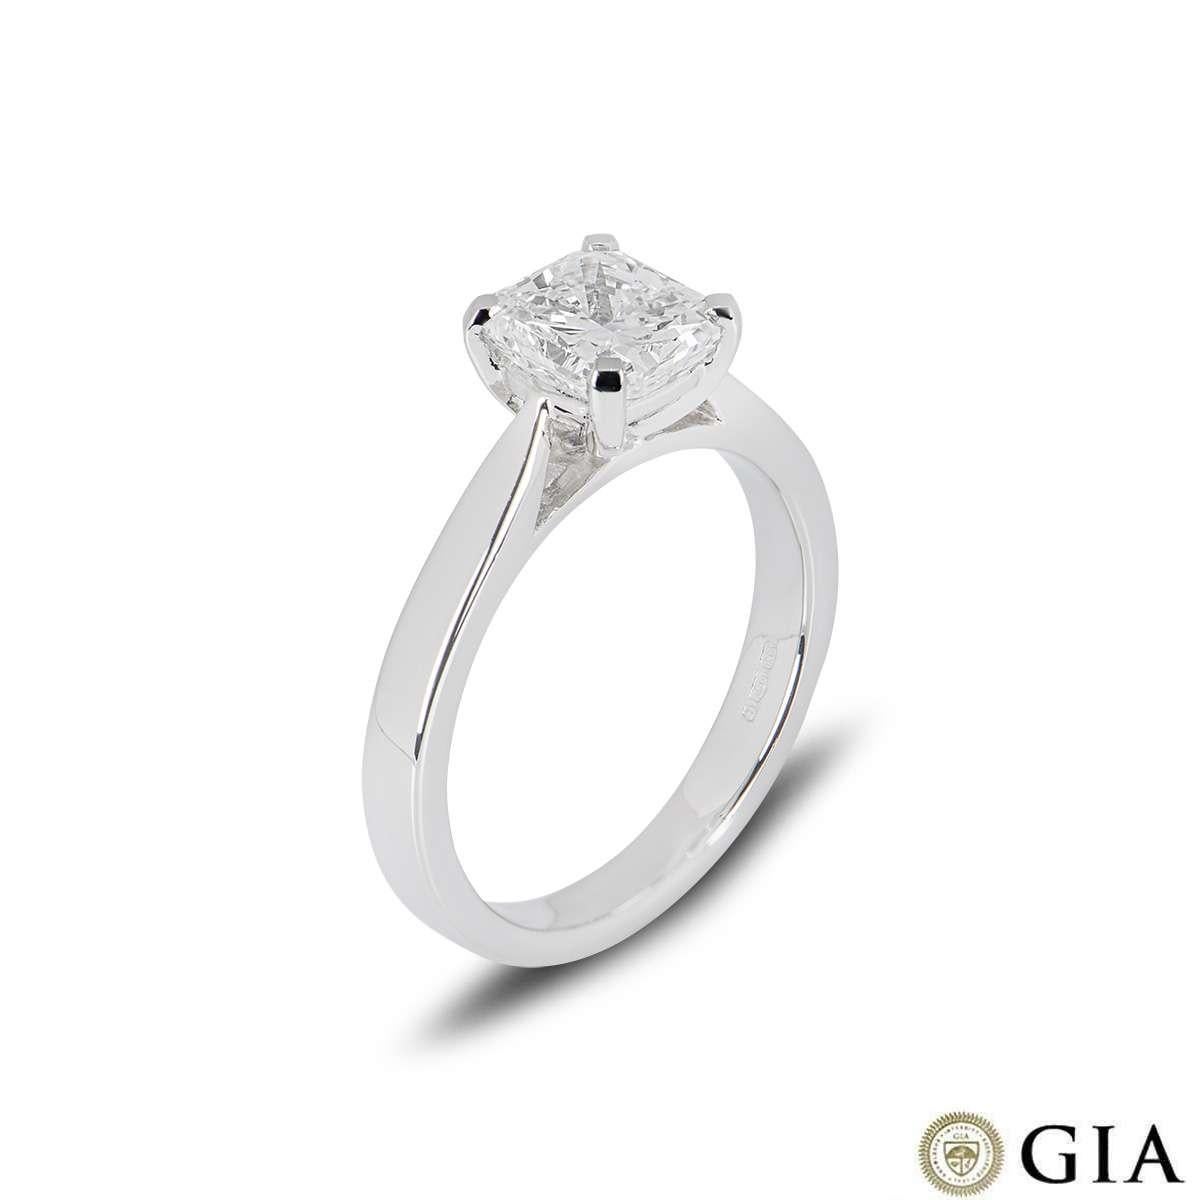 A gorgeous platinum diamond ring. The ring is set with a radiant cut diamond weighing 1.51ct, G colour and VS2 in clarity set within a classic four claw mount. The ring is currently a size UK M - EU 52 - US 6 but can be adjusted for a perfect fit